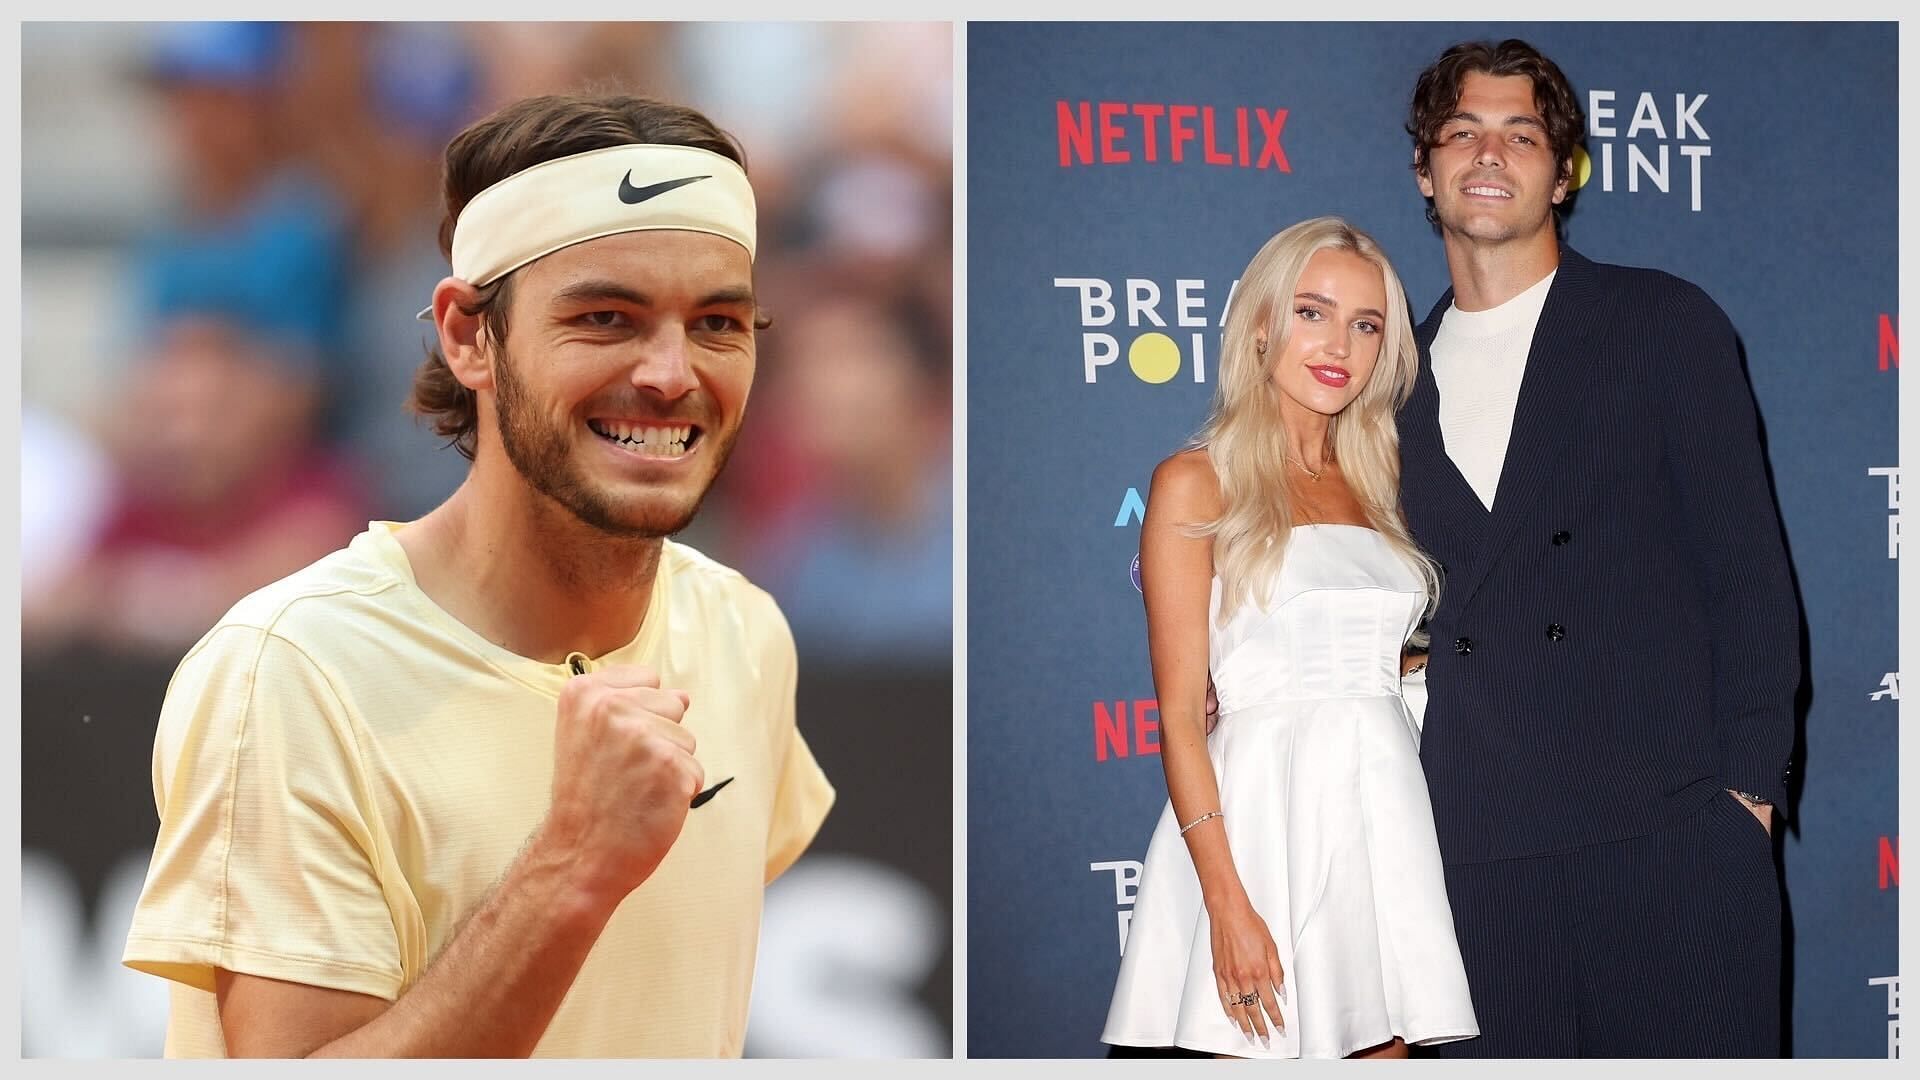 Taylor Fritz(left) and with girlfriend Morgan Riddle(right)